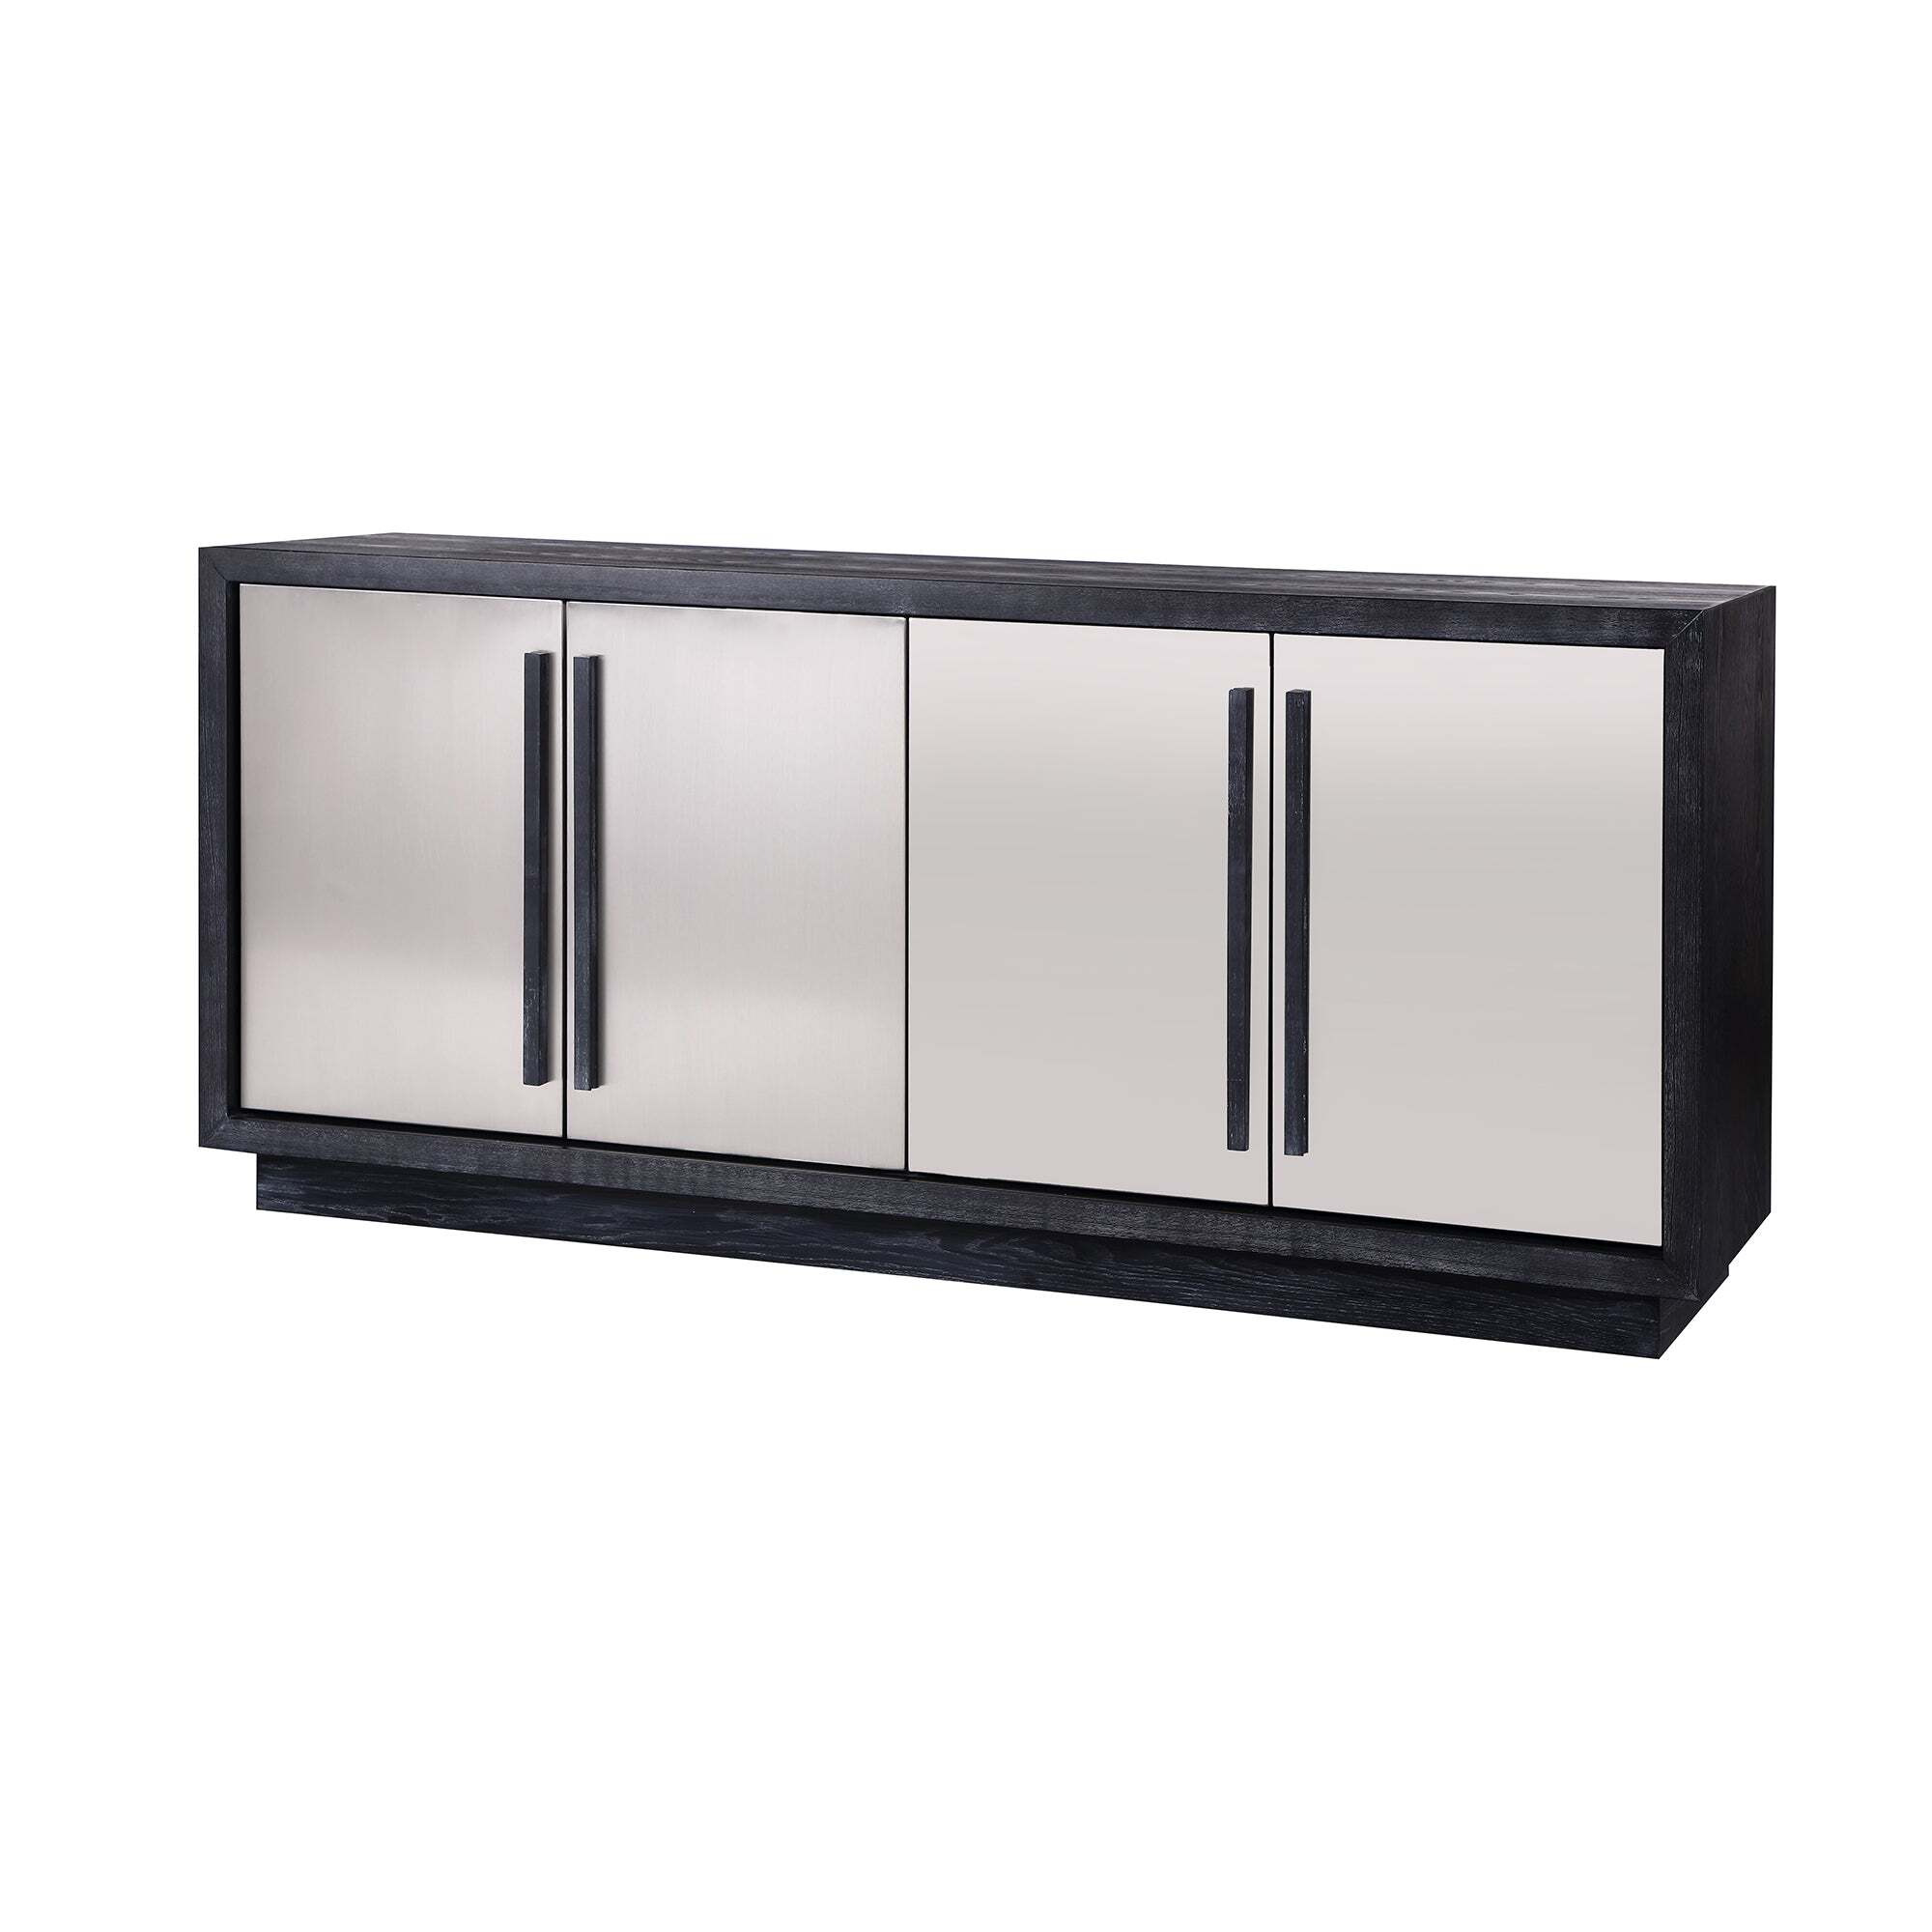 Liang & Eimil Camden Sideboard Stainless Steel Front - image 1